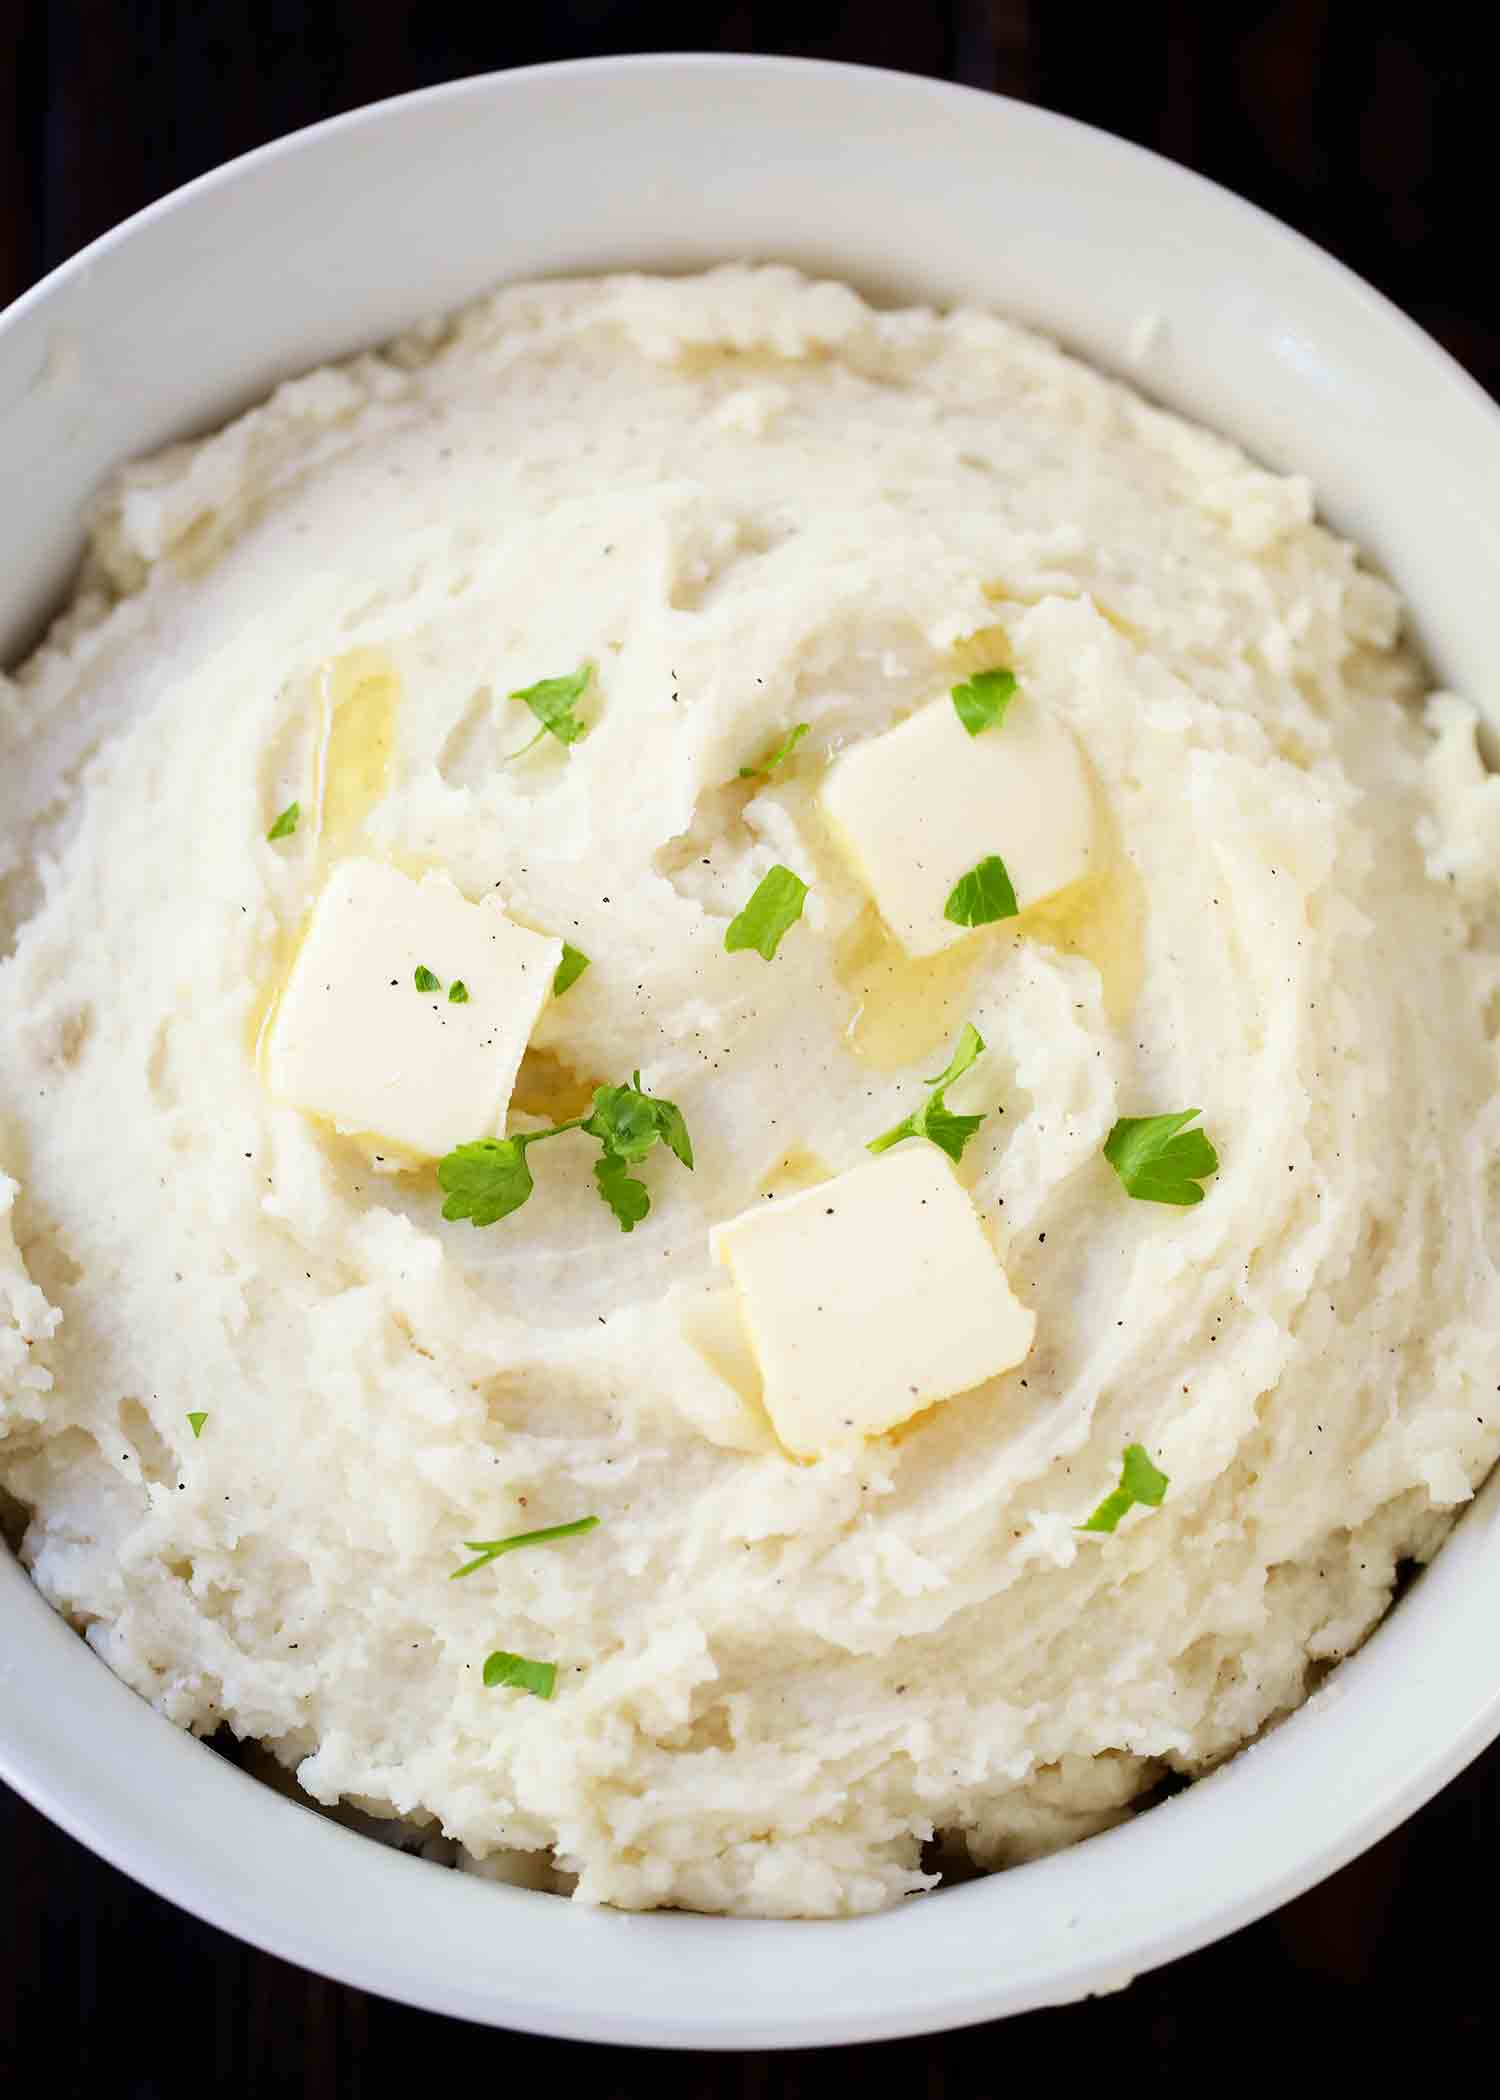 Best Thanksgiving Sides - Creamy Mashed Potatoes